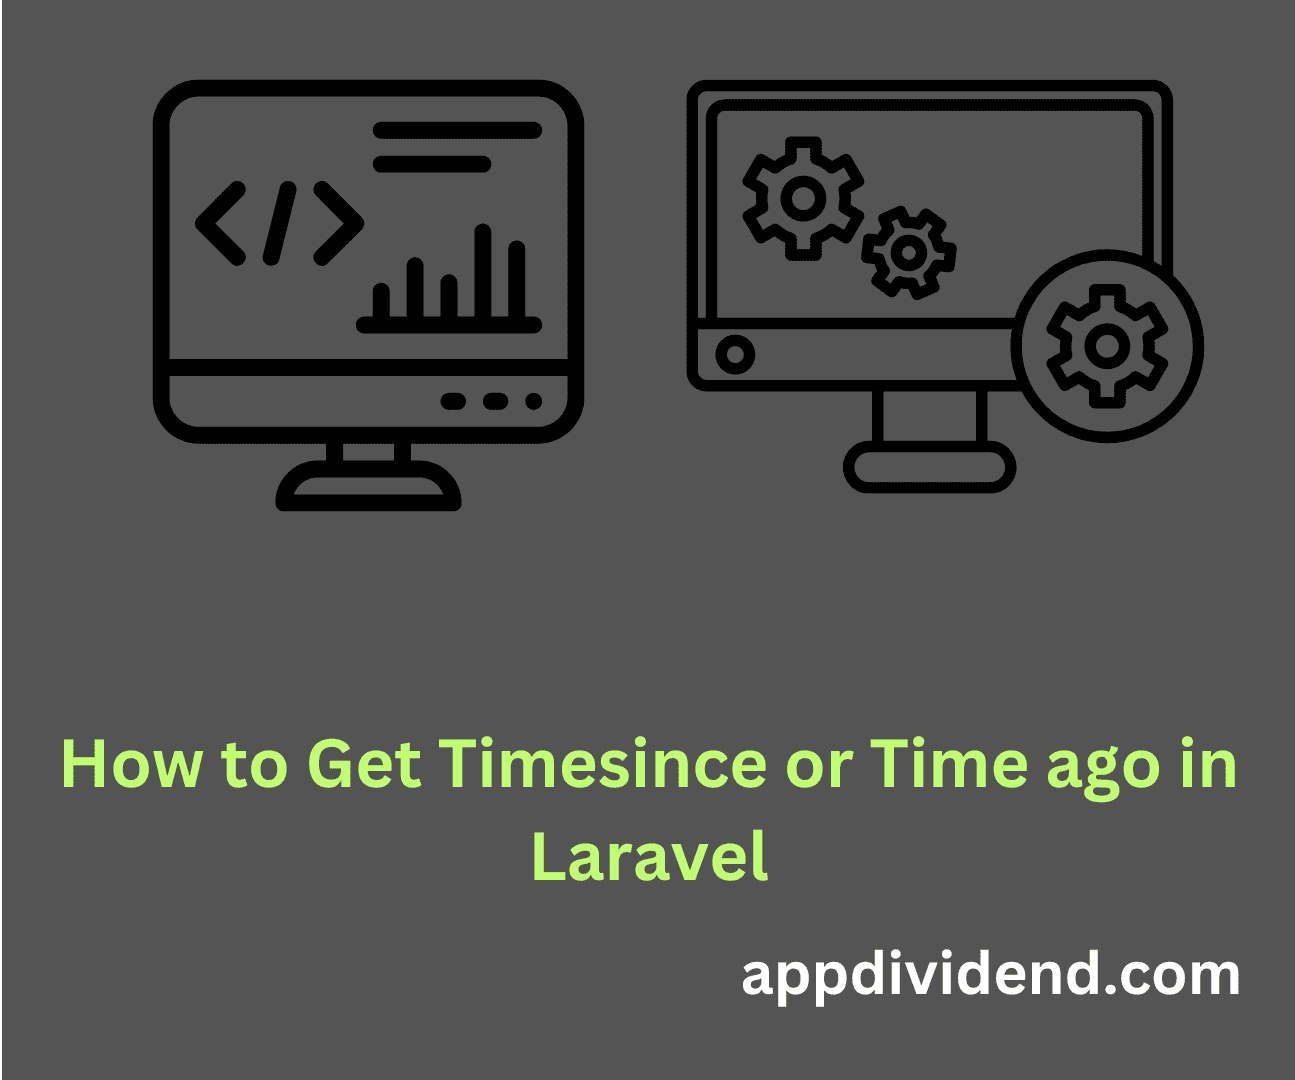 How to Get Timesince or Time ago in Laravel 11